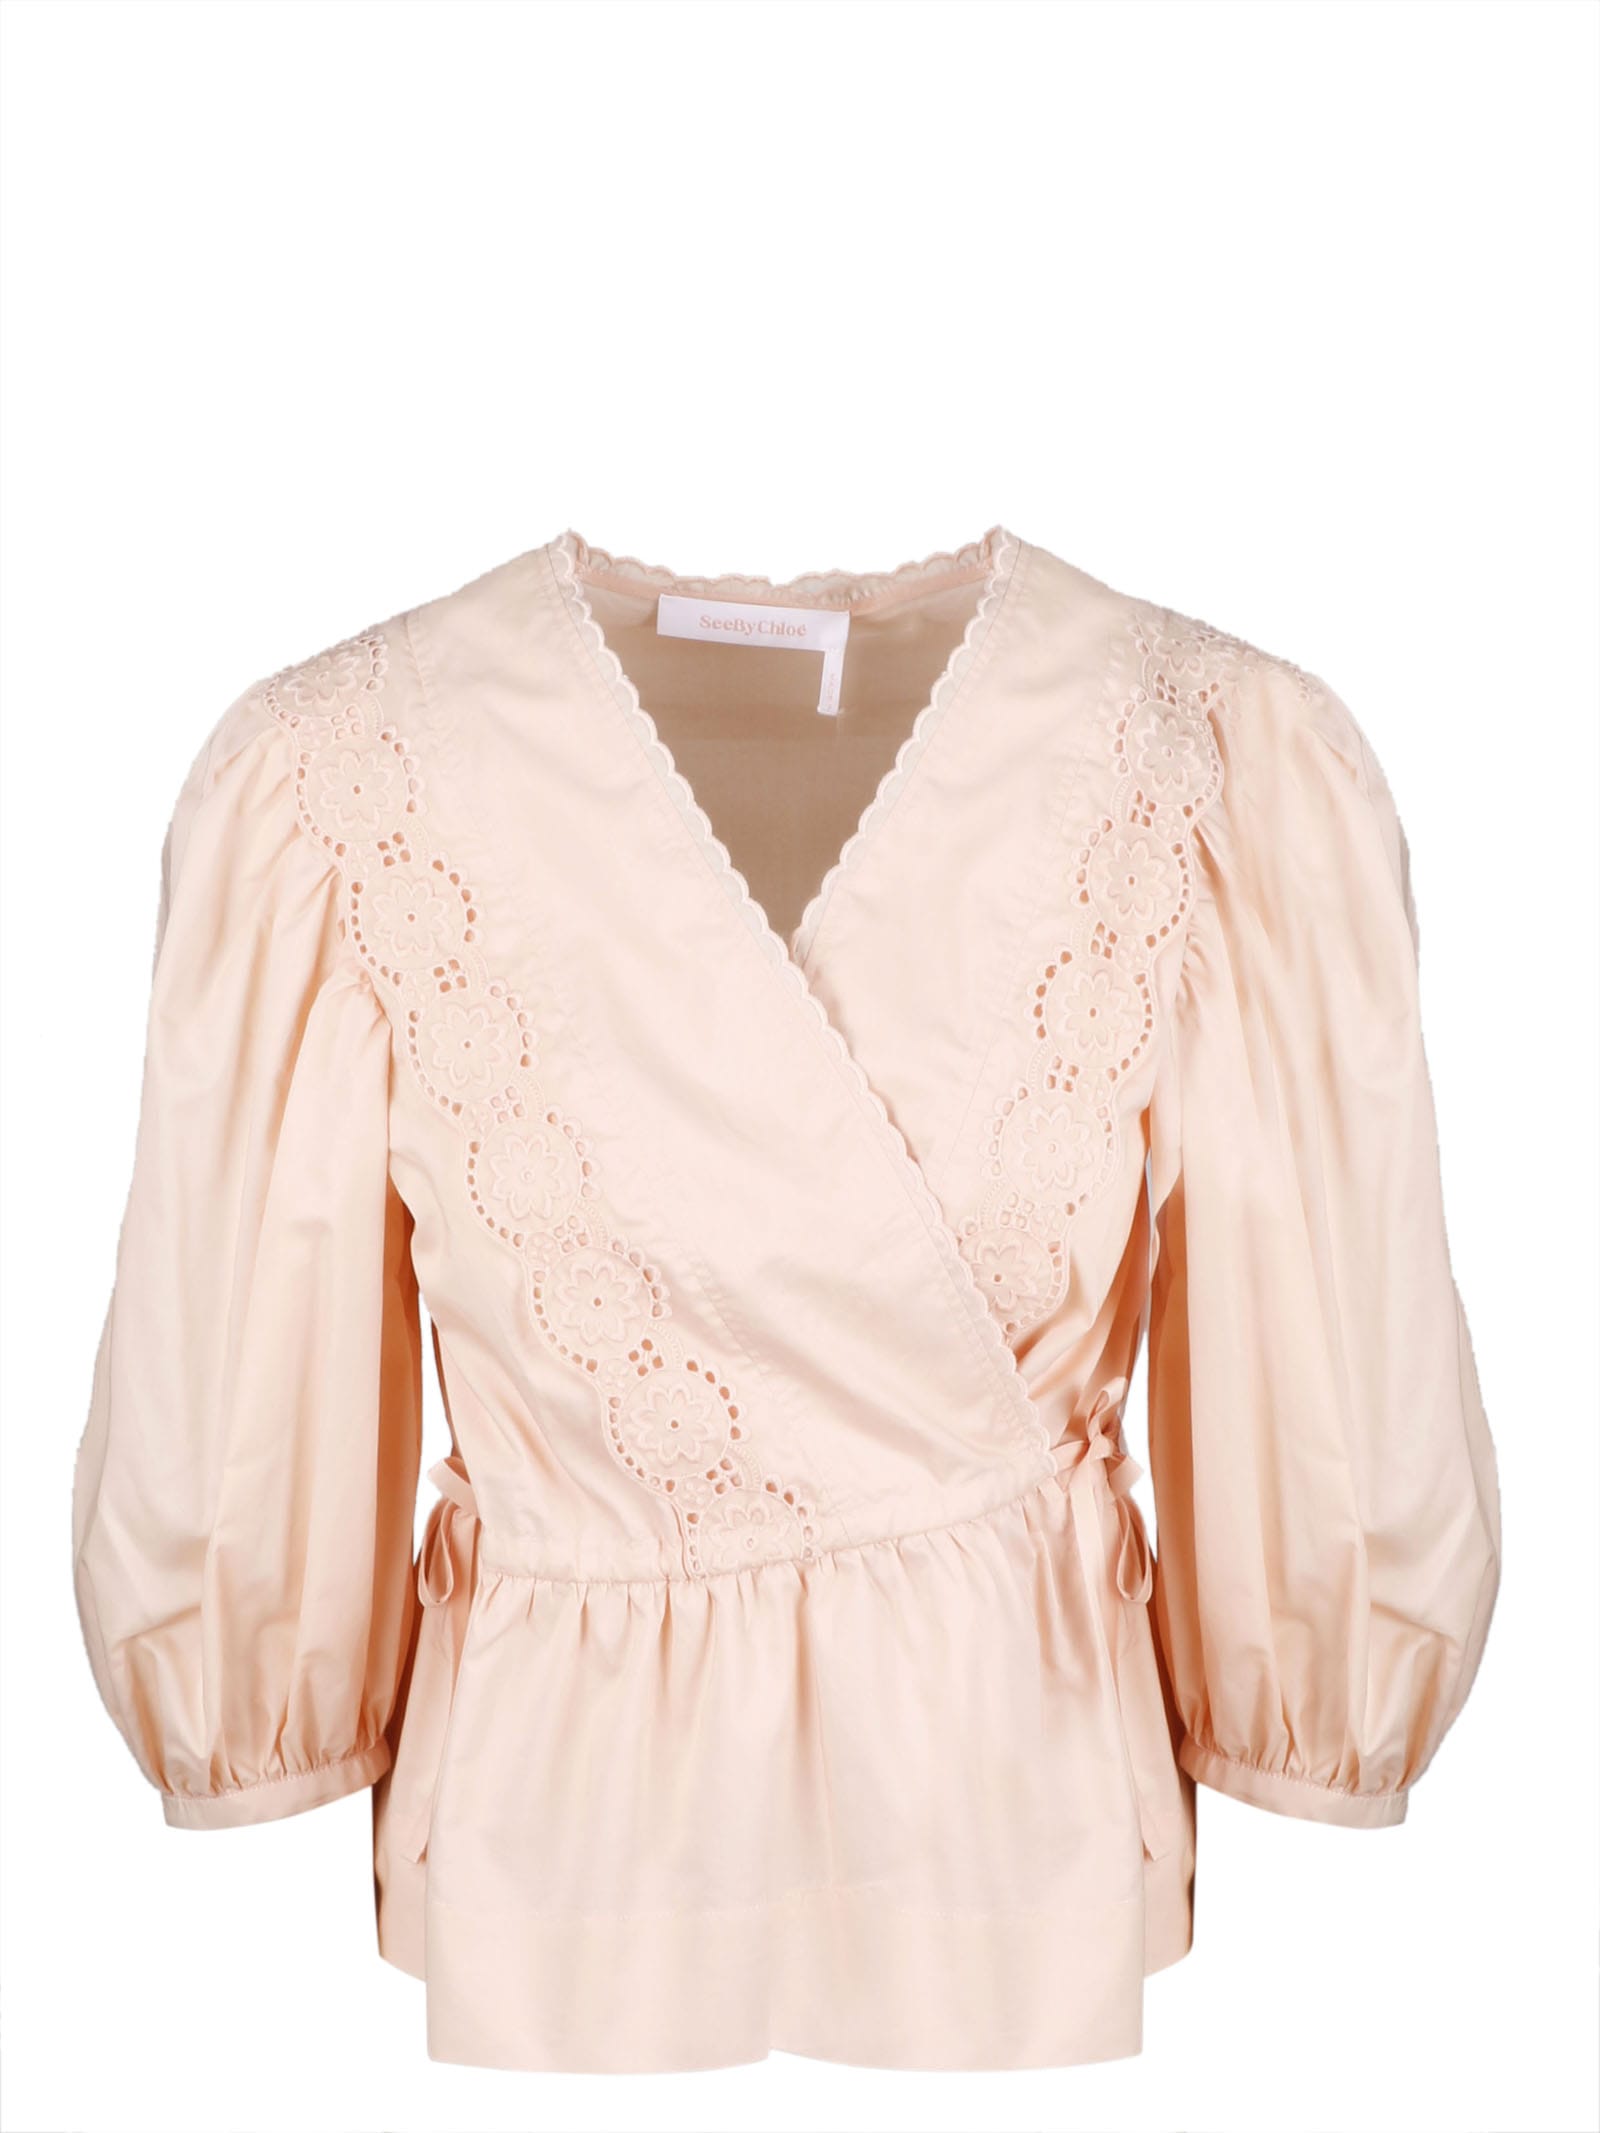 See by Chloé Embroidered Poplin Top